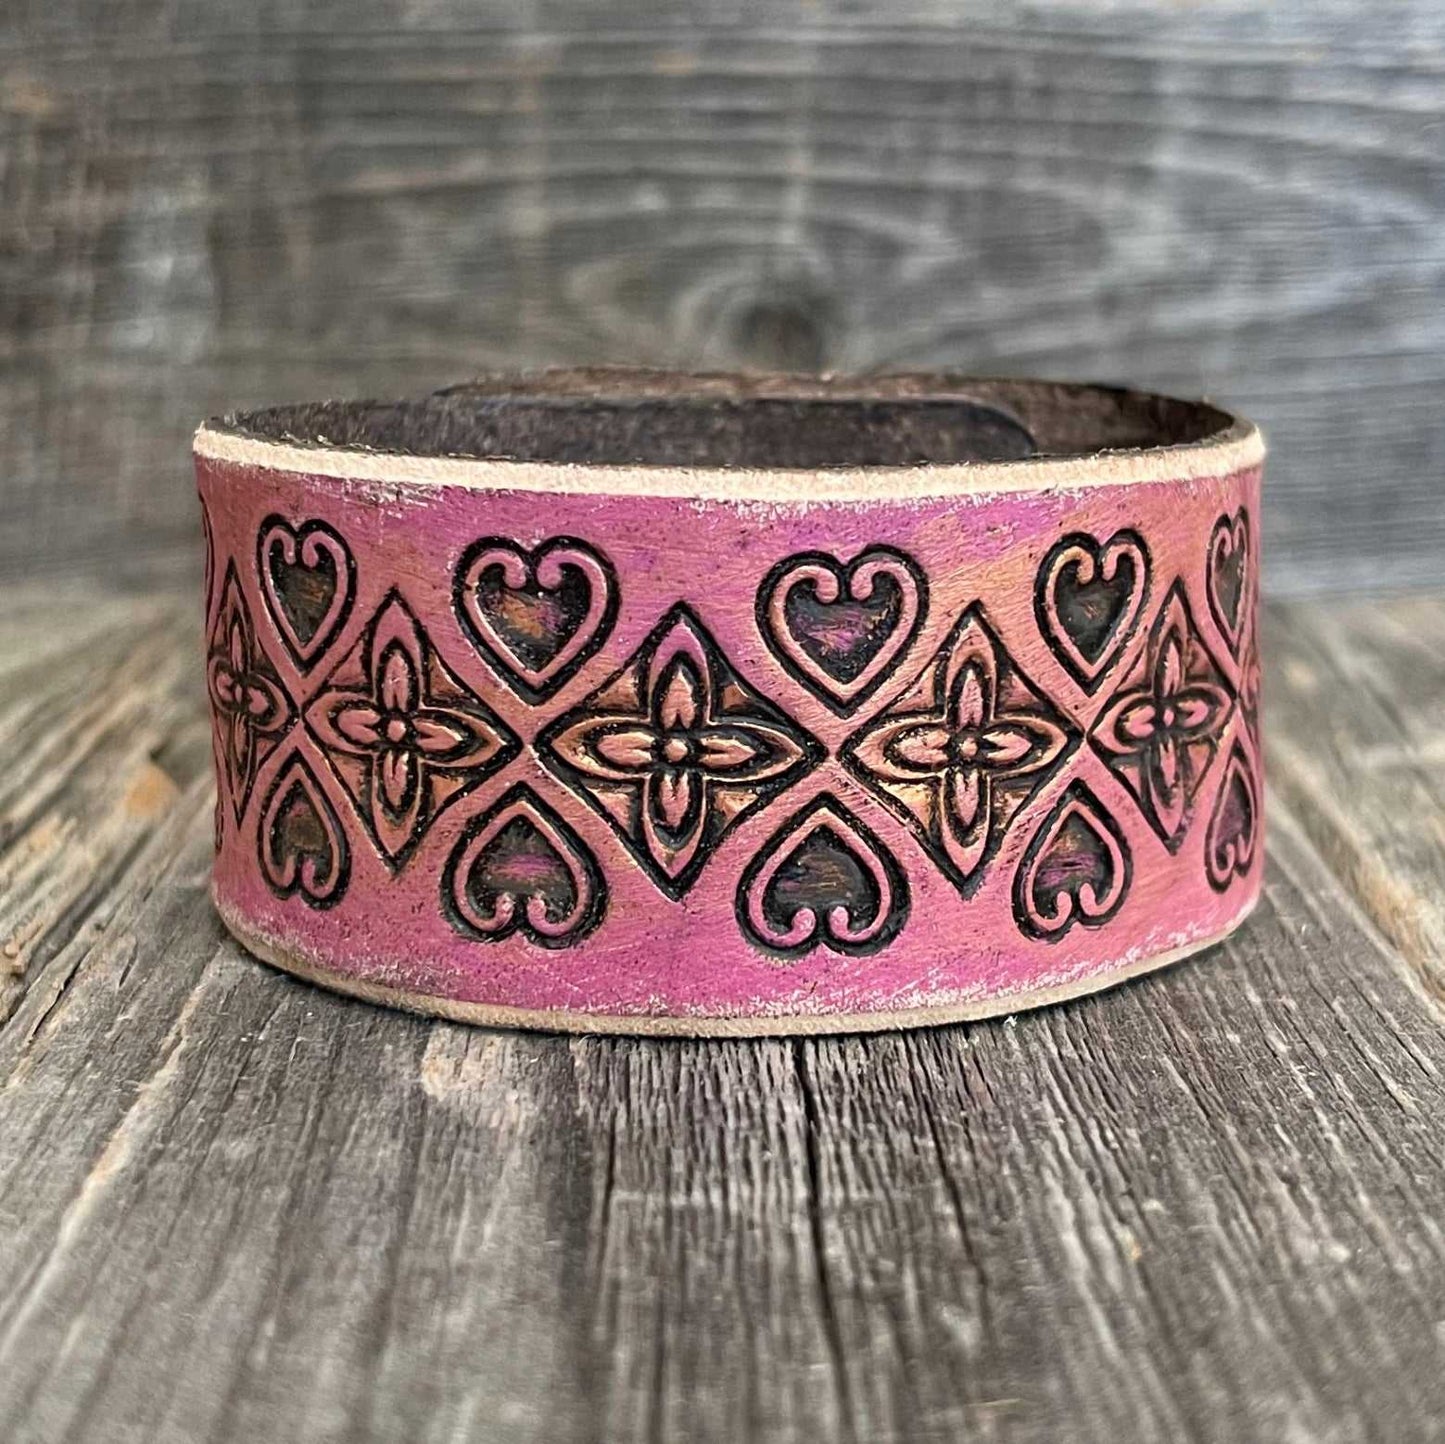 One of a kind, genuine tooled leather wide boho bracelet with tooled hearts pattern